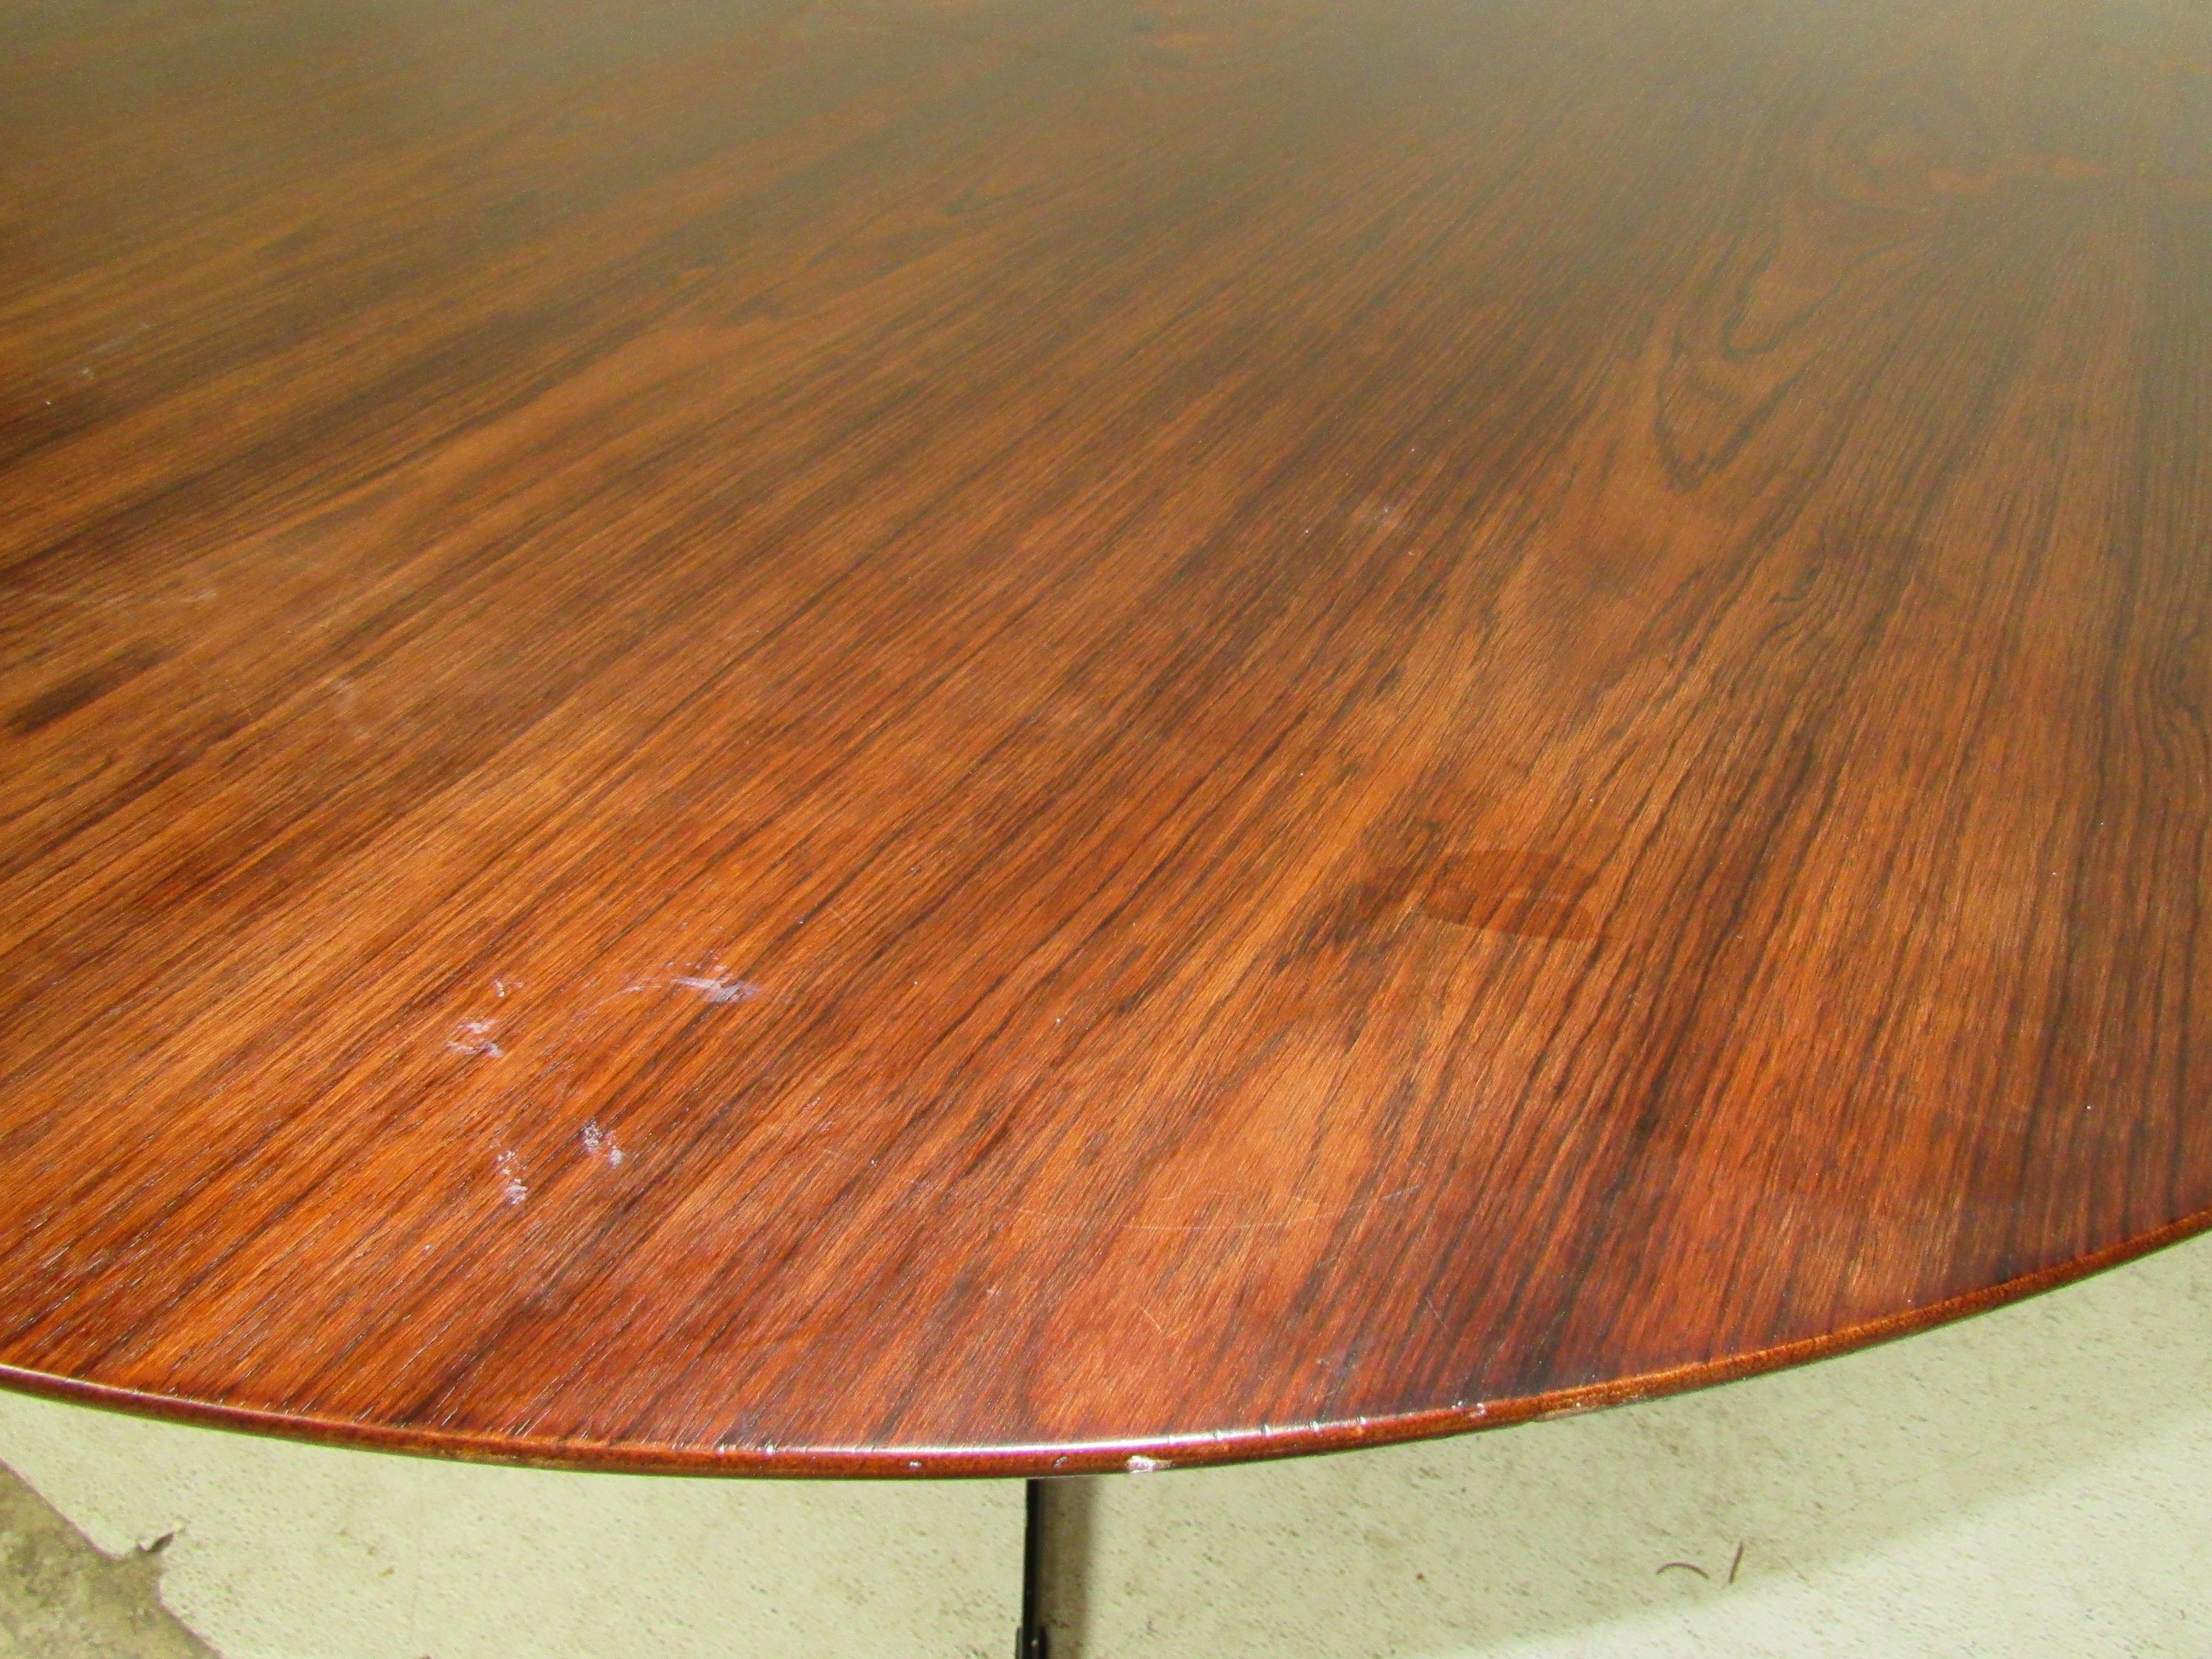 Mid-20th Century Six Star Series Rosewood Table by Arne Jacobsen for Fritz Hansen For Sale